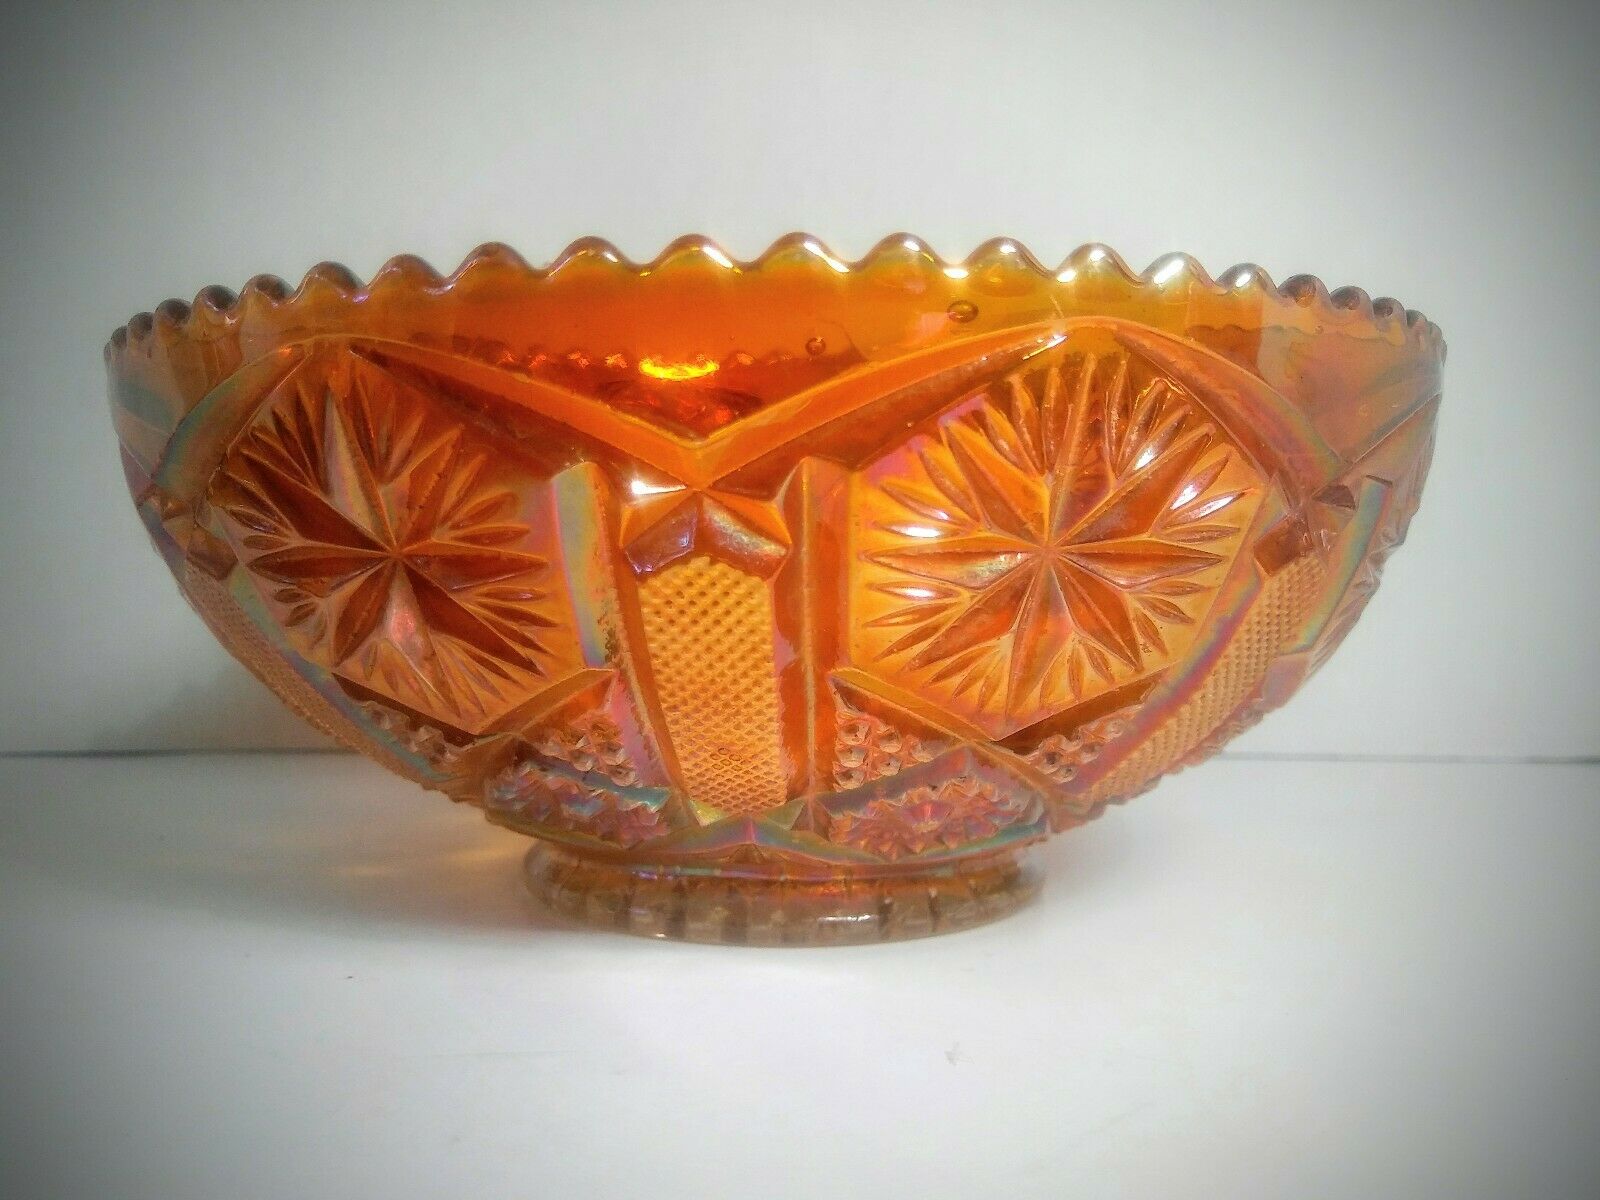 Imperial Marigold Carnival Glass 7" Bowl In Pattern "star N File"